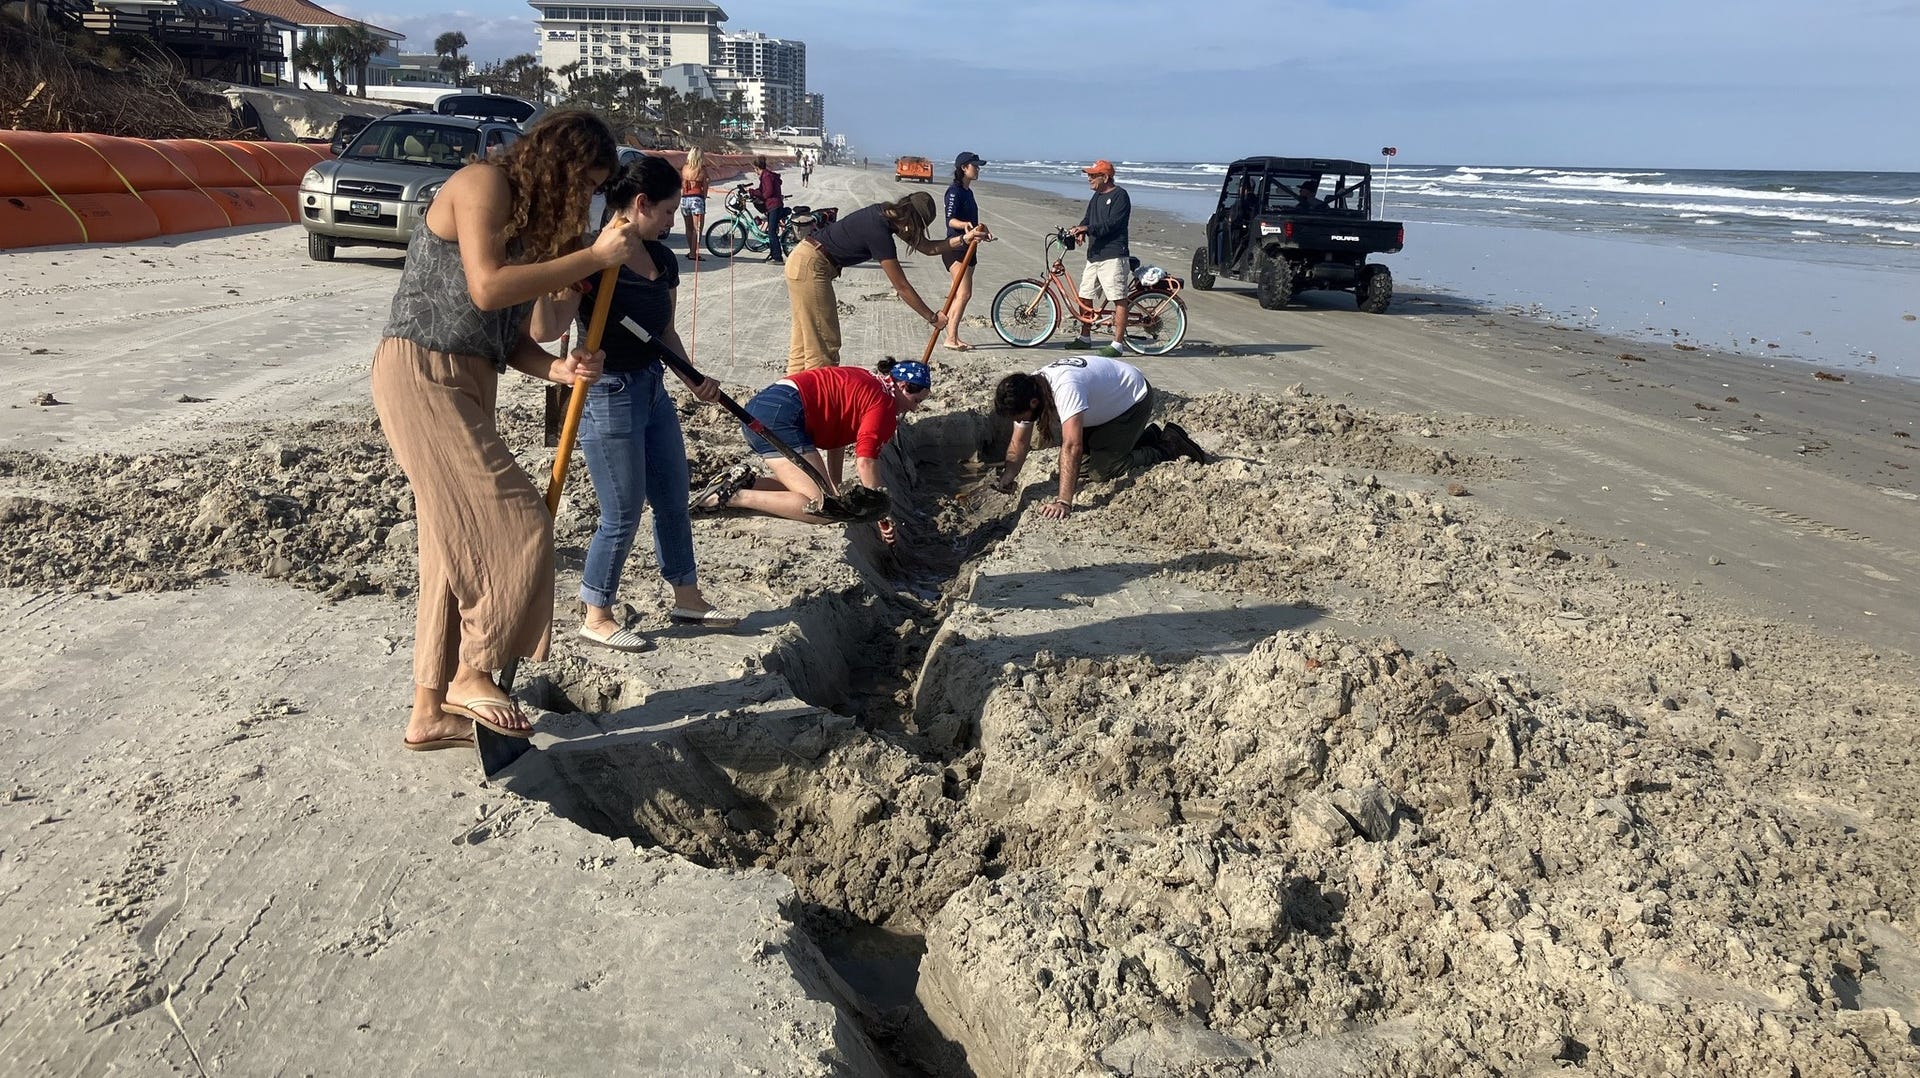 A group of people with shovels work on a trench in the sand on a Florida beach, uncovering part of a historic shipwreck.